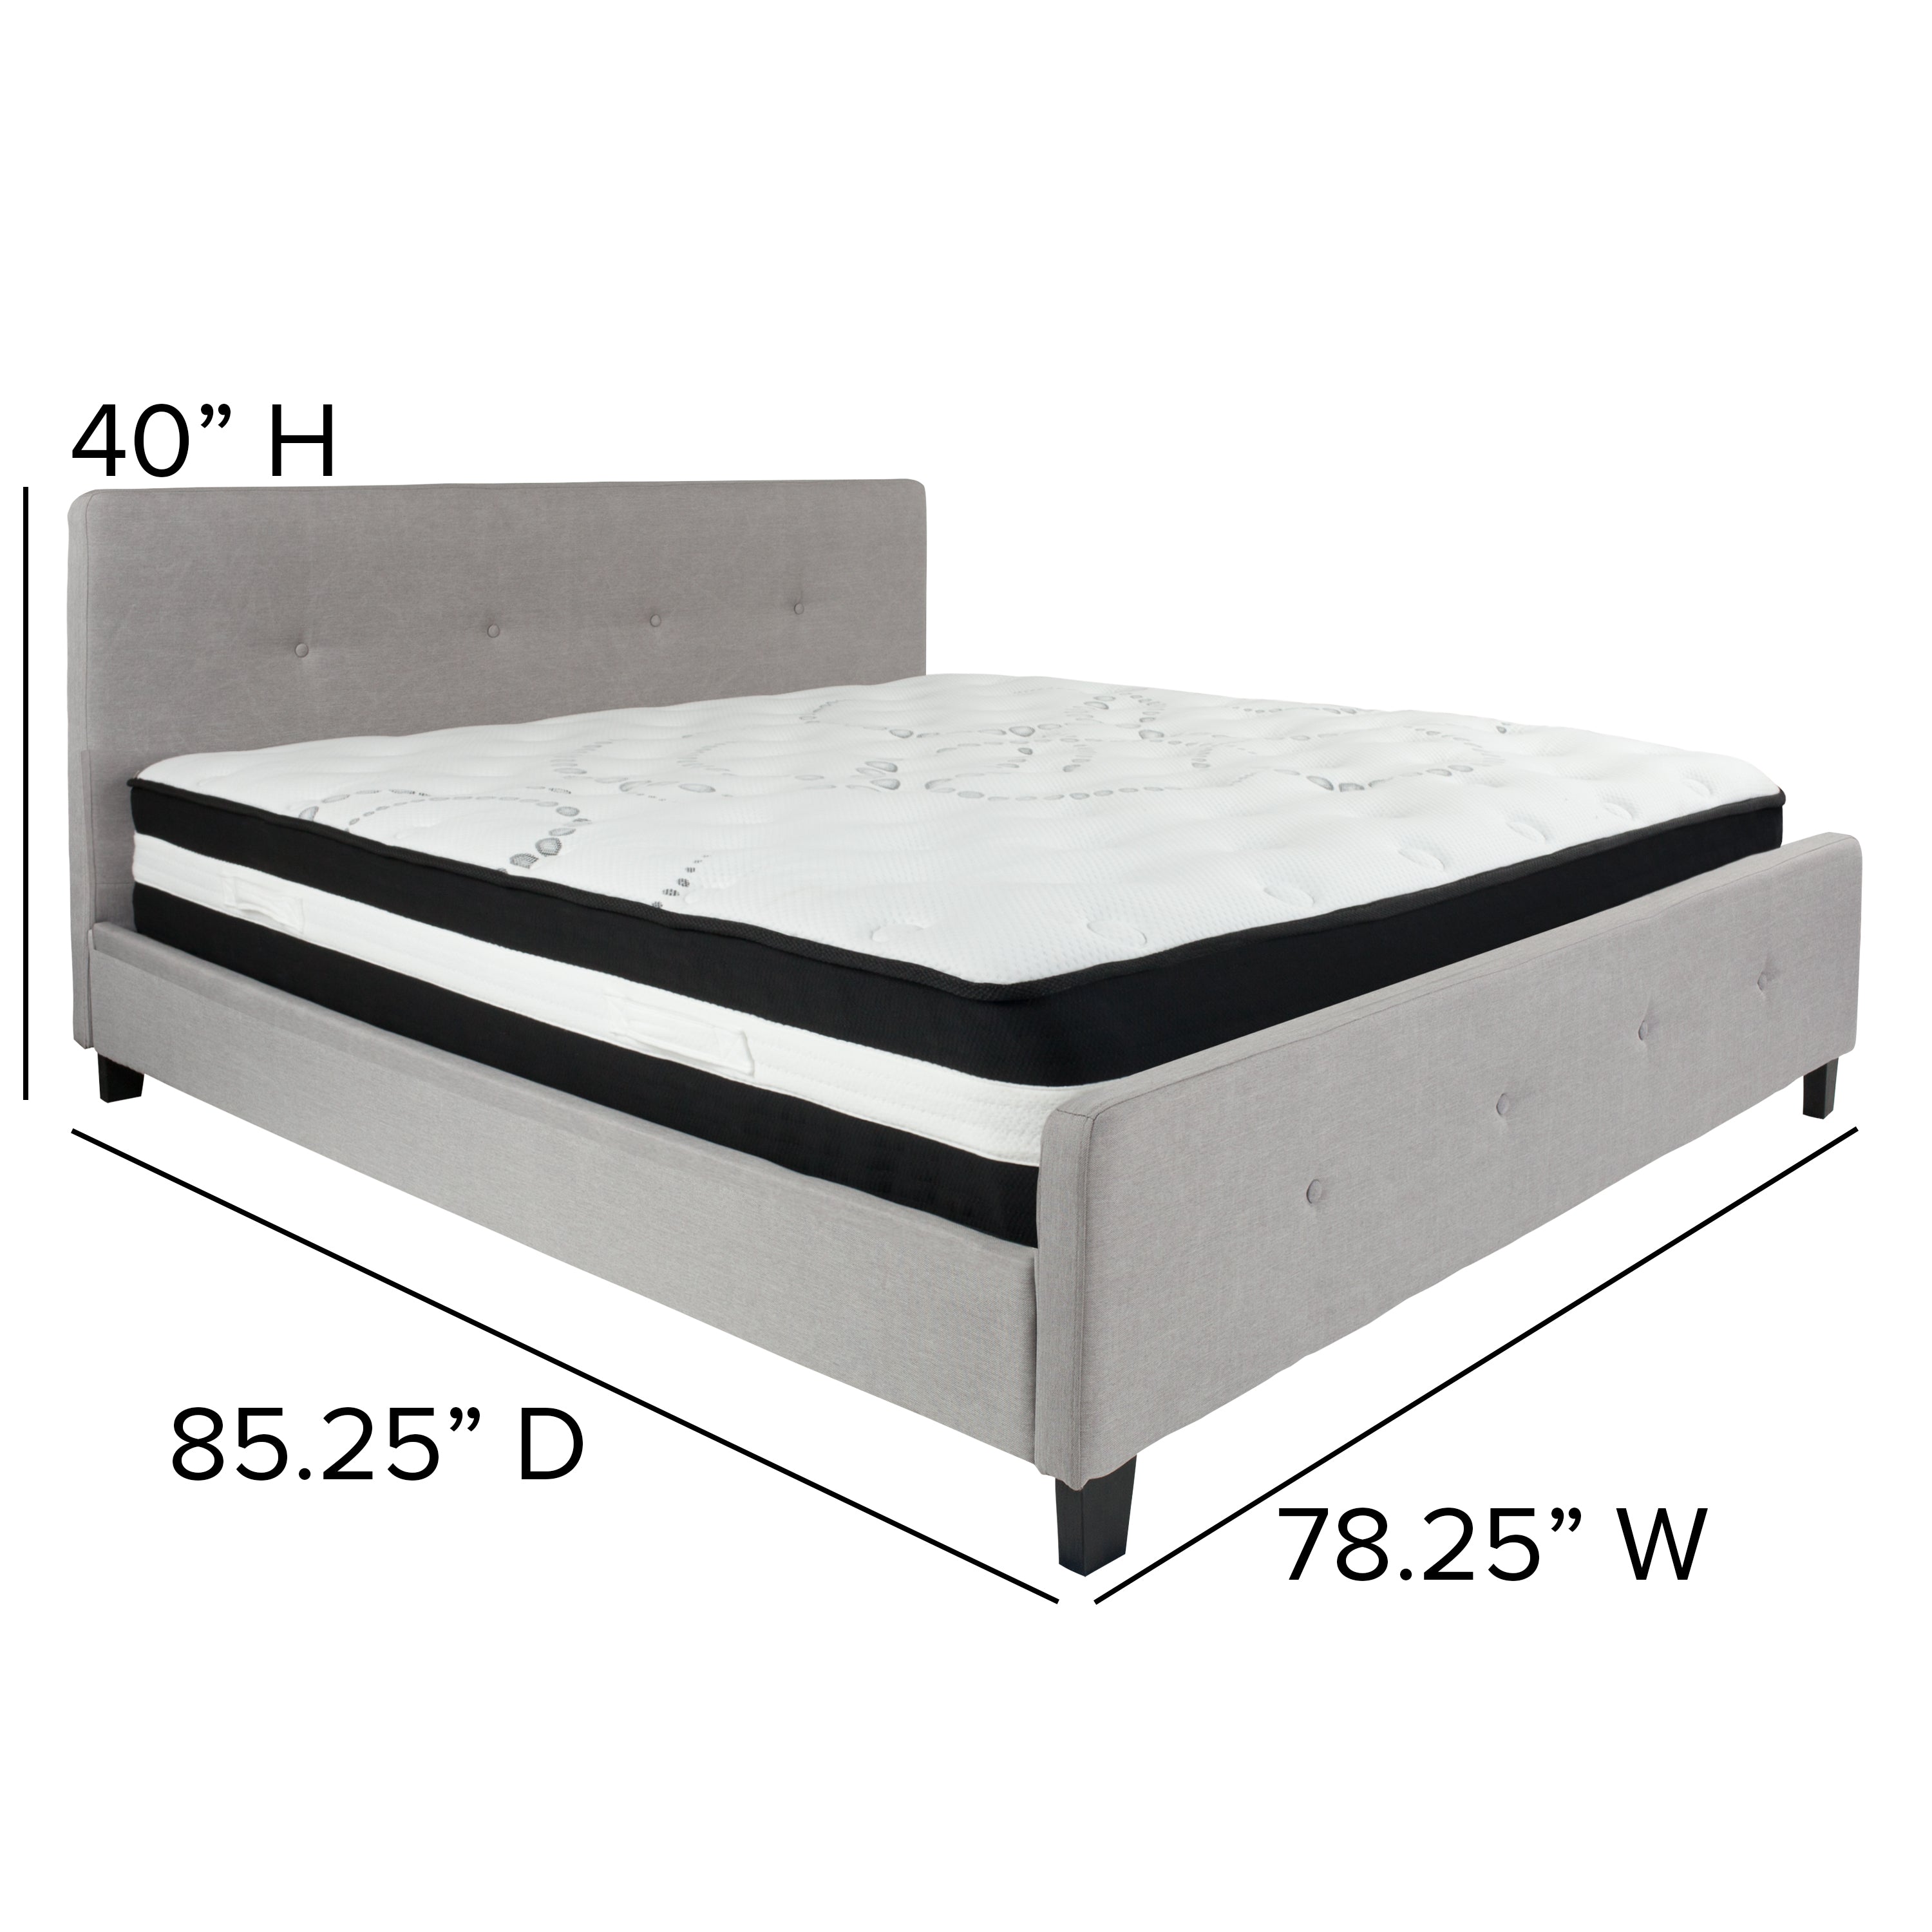 Tribeca Button Tufted Upholstered Platform Bed with Pocket Spring Mattress-Bed & Mattress-Flash Furniture-Wall2Wall Furnishings